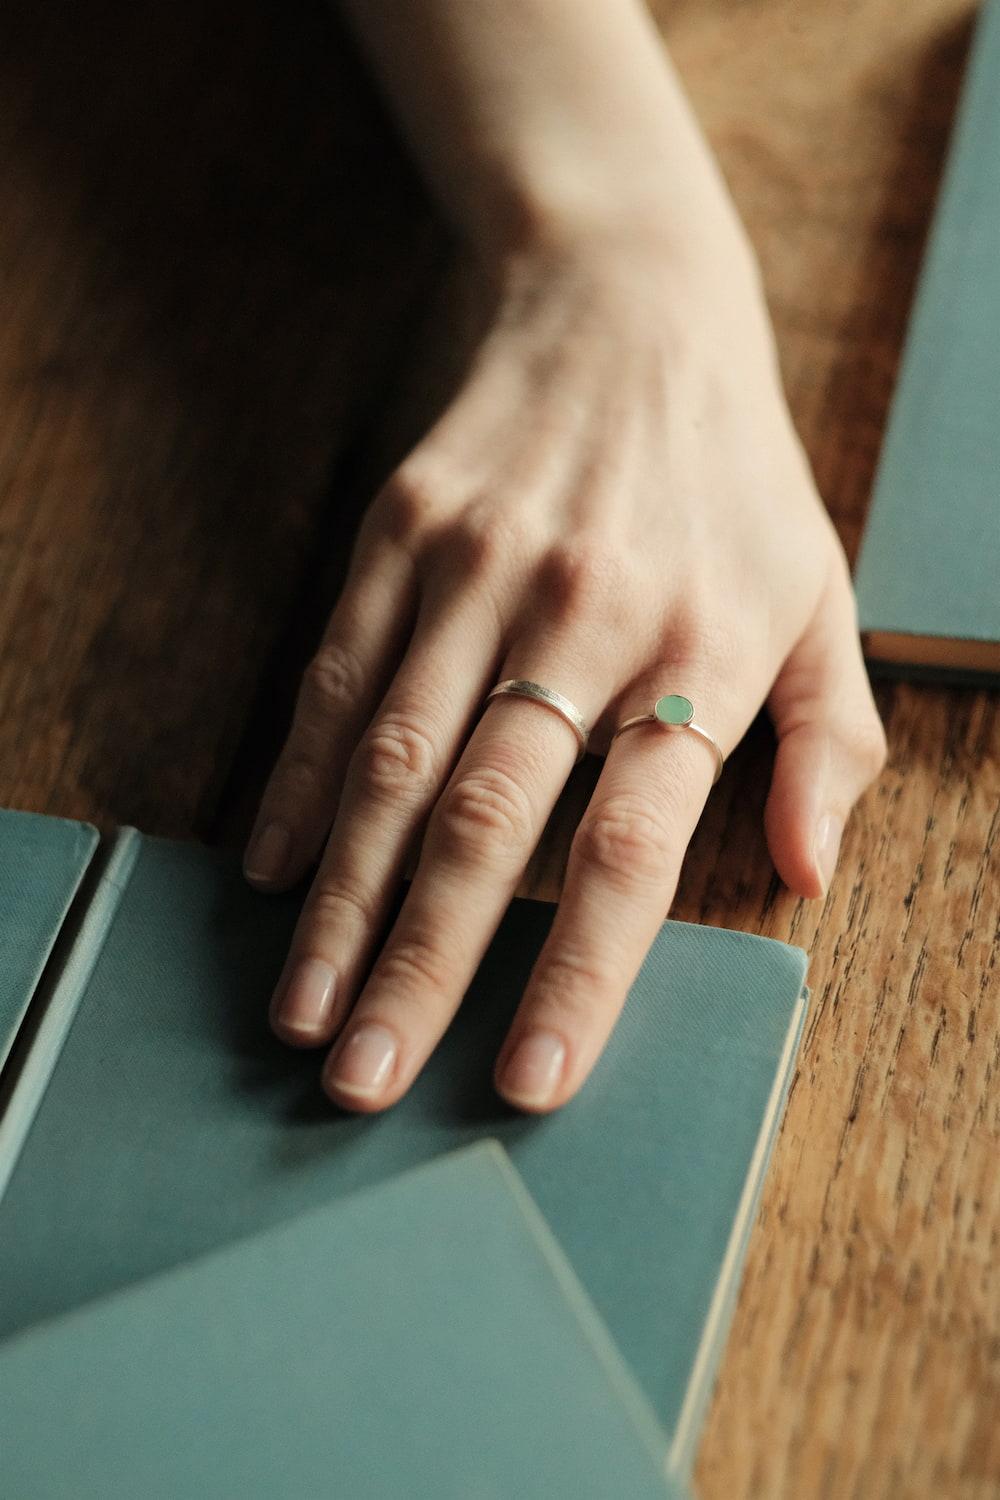 Our silver ring with the stone of energizing turquoise shade is made for you if you love subtle yet eye-catching accessories. Wear it to add a splash of colour to any of your outfits. 

The ring is adorned with chrysoprase, stone that stimulates